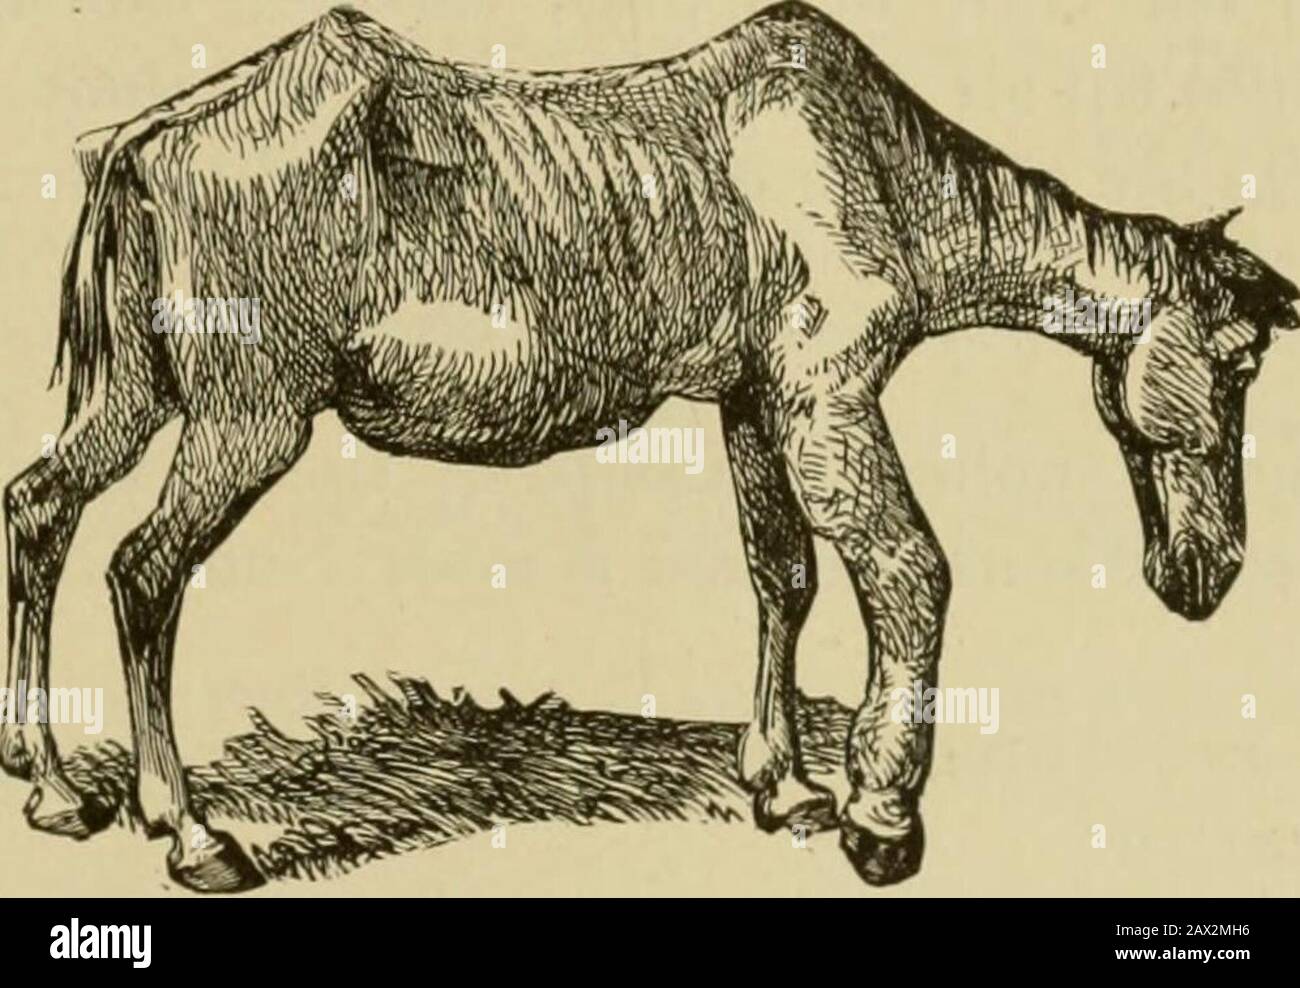 Live stock : a cyclopedia for the farmer and stock owner including the breeding, care, feeding and management of horses, cattle, swine, sheep and poultry with a special department on dairying : being also a complete stock doctor : with one thousand explanatory engravings . inary-sized horse. Larger doses may begiven in the spring than in the fall. The dose must be diminished in BODY OF THE HORSE, ITS EXTERNAL ACCIDENTS AND DISEASES. 885 size for tender years, even if the colt is as large as he ever will be. Thealoes may be given in a bolus the size and shape of your finger, andpassed back into Stock Photo